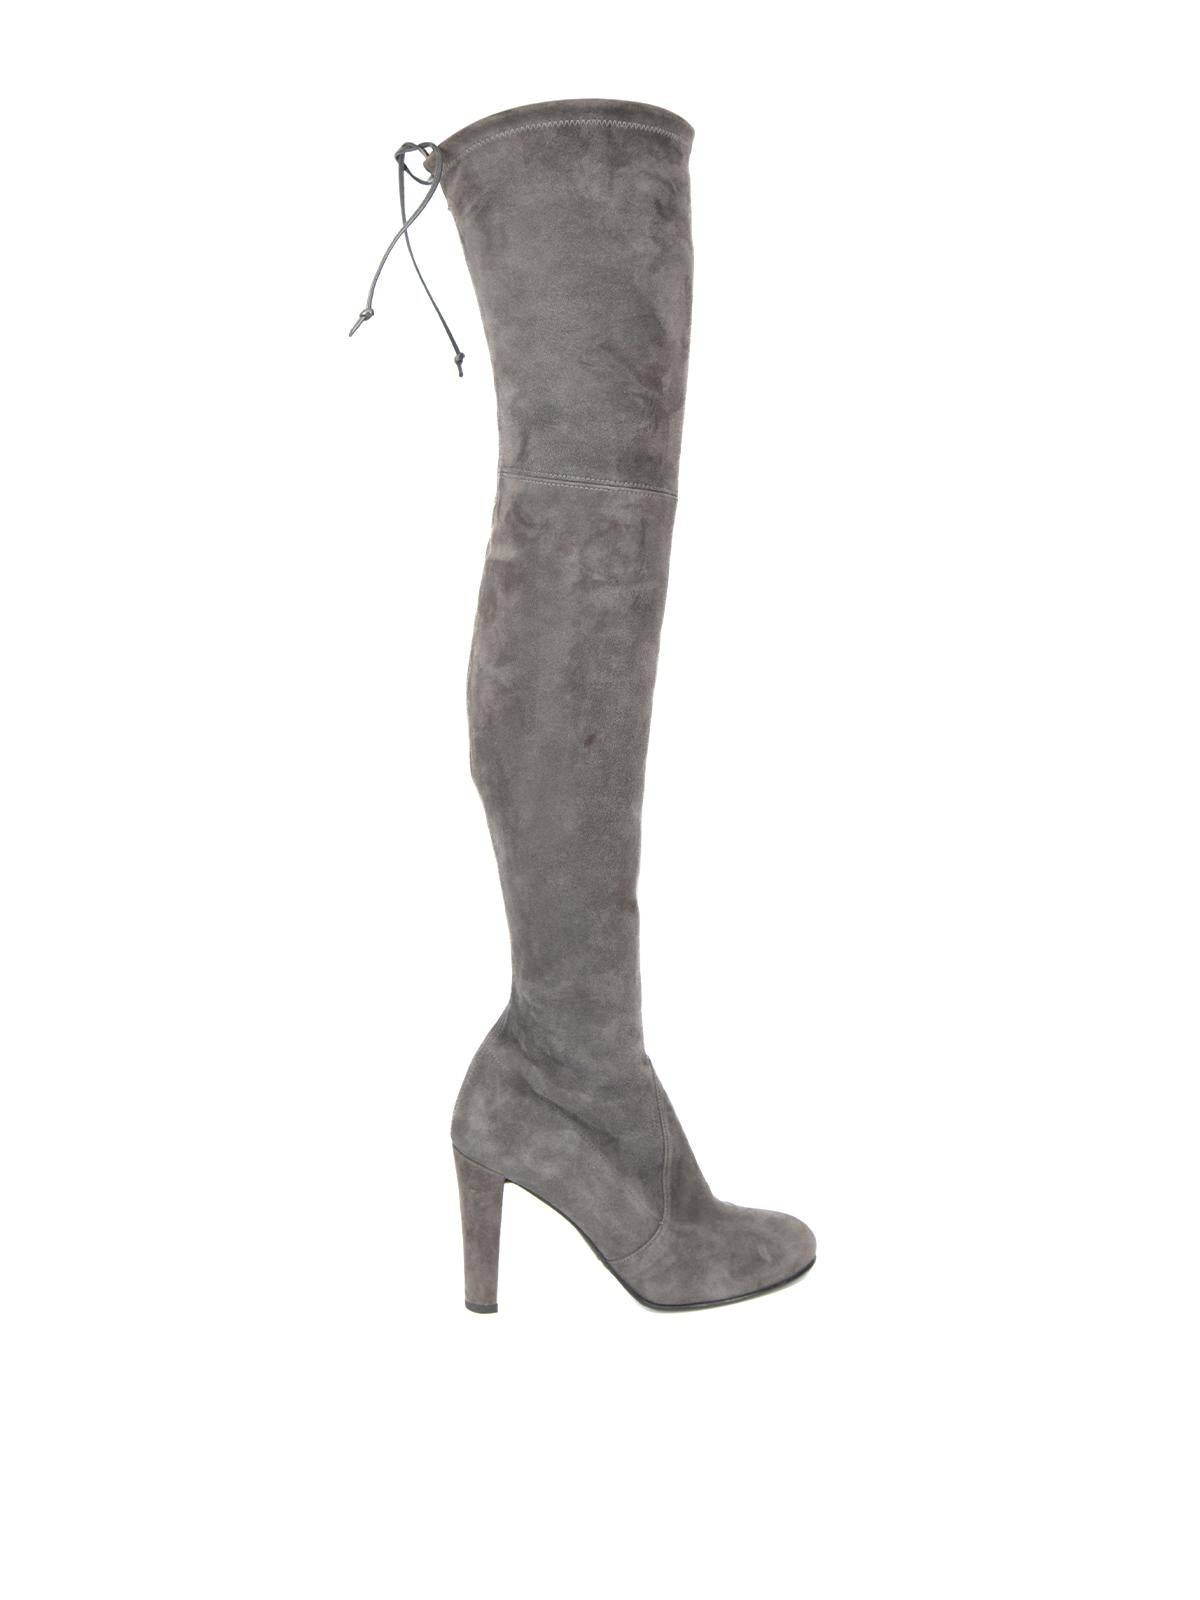 CONDITION is Very good. Minimal wear to boots is evident. Minimal wear to the suede exterior where some light scuffs/marks can be seen on this used Stuart Weitzman designer resale item. Details Grey Suede Over the knee boots Pull on Adjustable tie